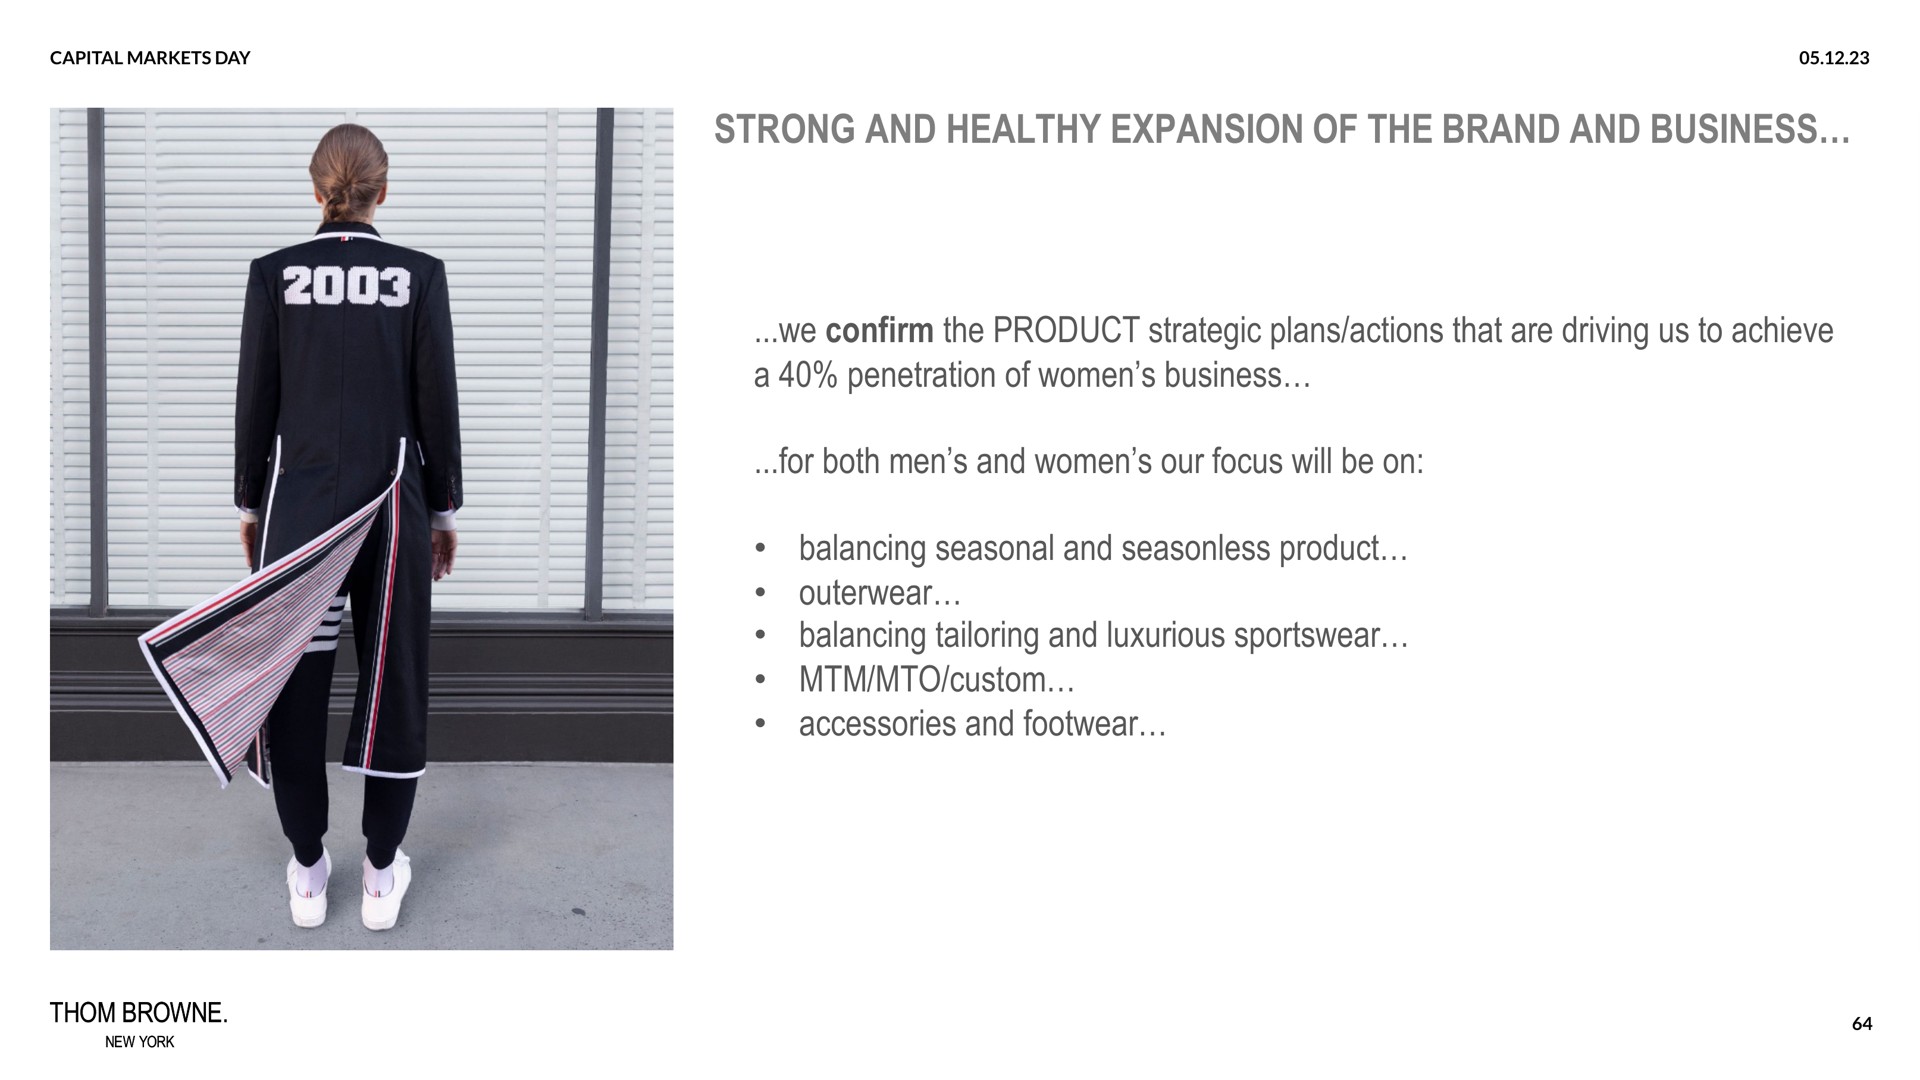 strong and healthy expansion of the brand and business we confirm the product strategic plans actions that are driving us to achieve a penetration of women business for both men and women our focus will be on balancing seasonal and seasonless product outerwear balancing tailoring and luxurious sportswear custom accessories and footwear a | Zegna